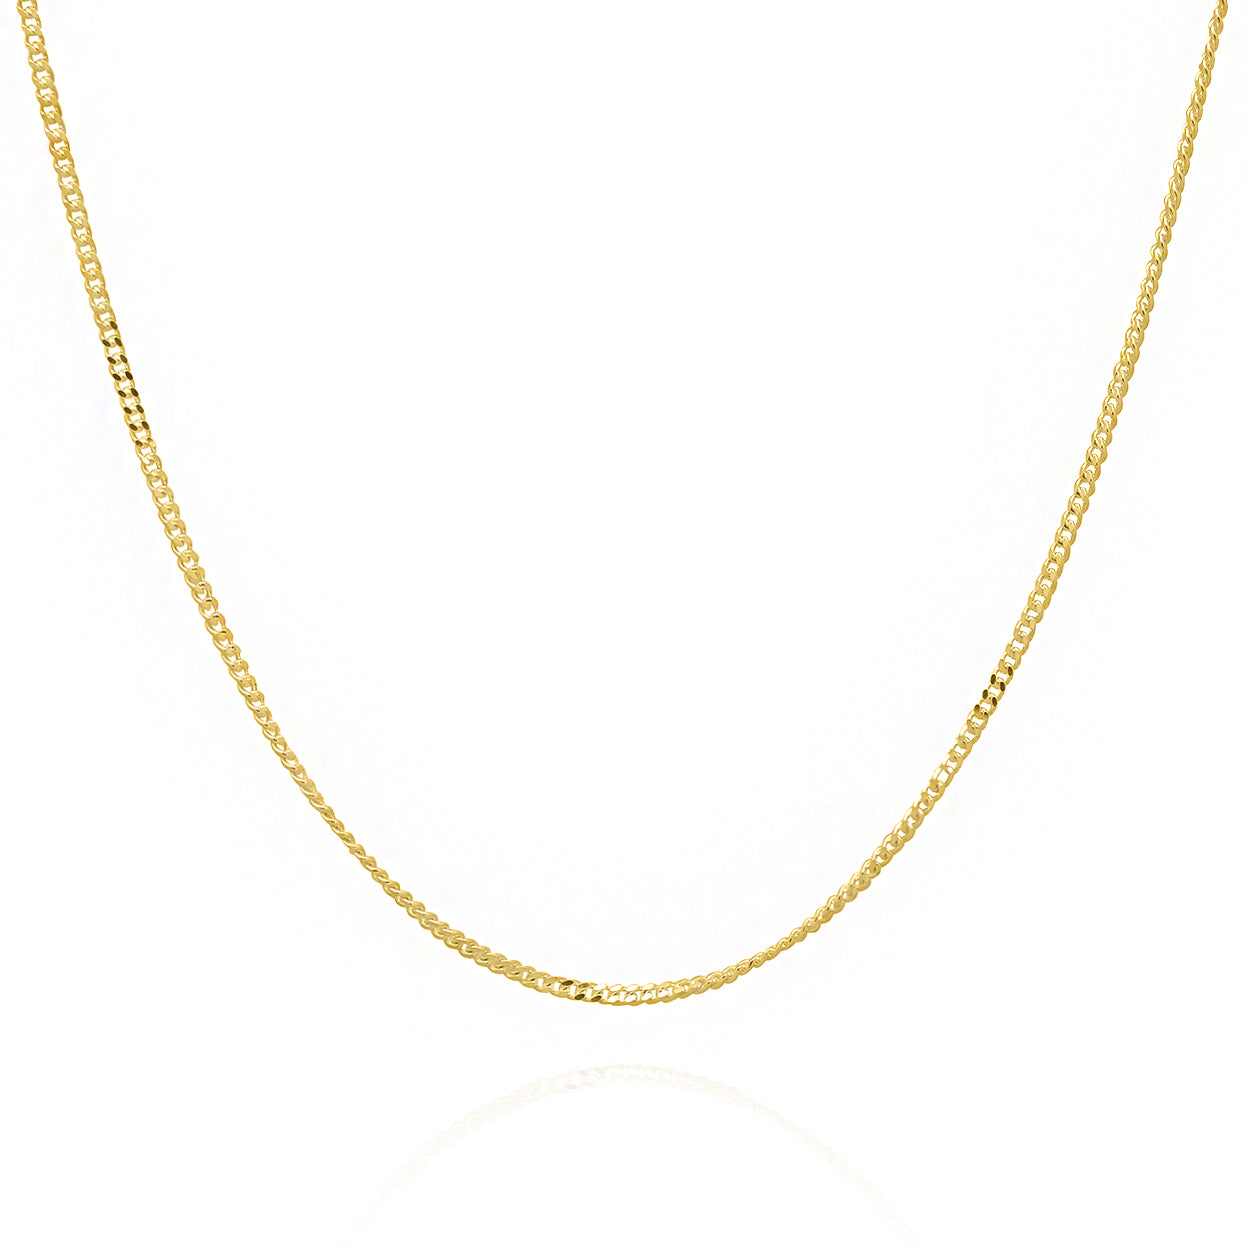 1.5mm Wide Curb Style Chain Solid Gold Yellow